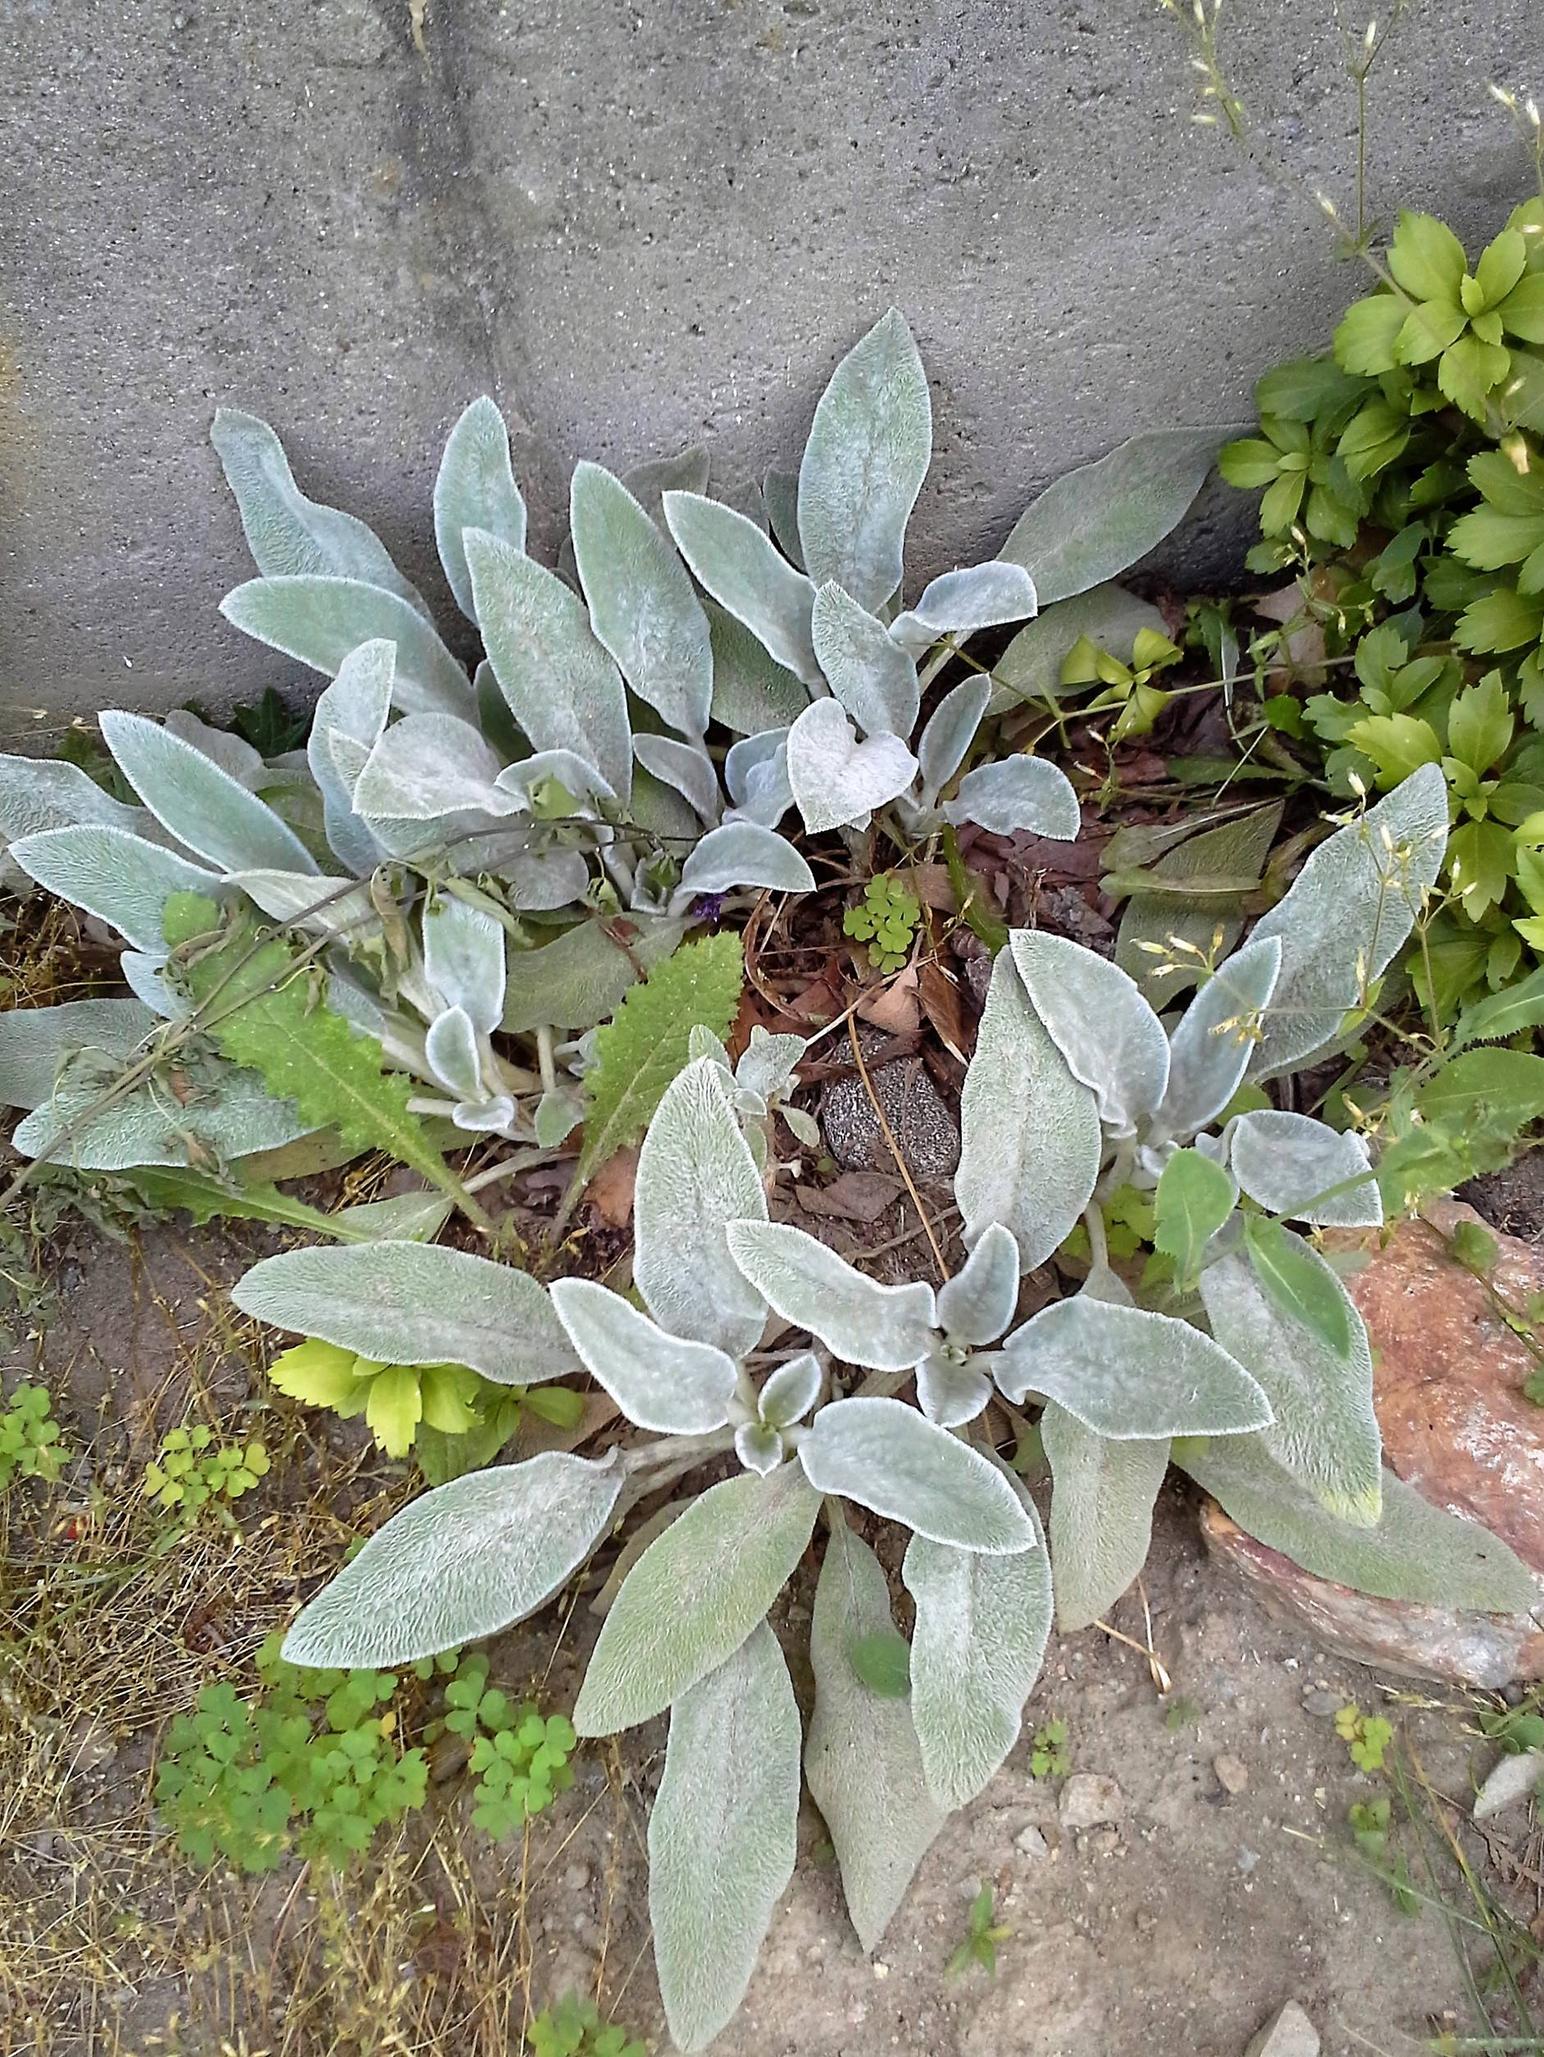 identification - What is this low-growing plant with fuzzy green and ...